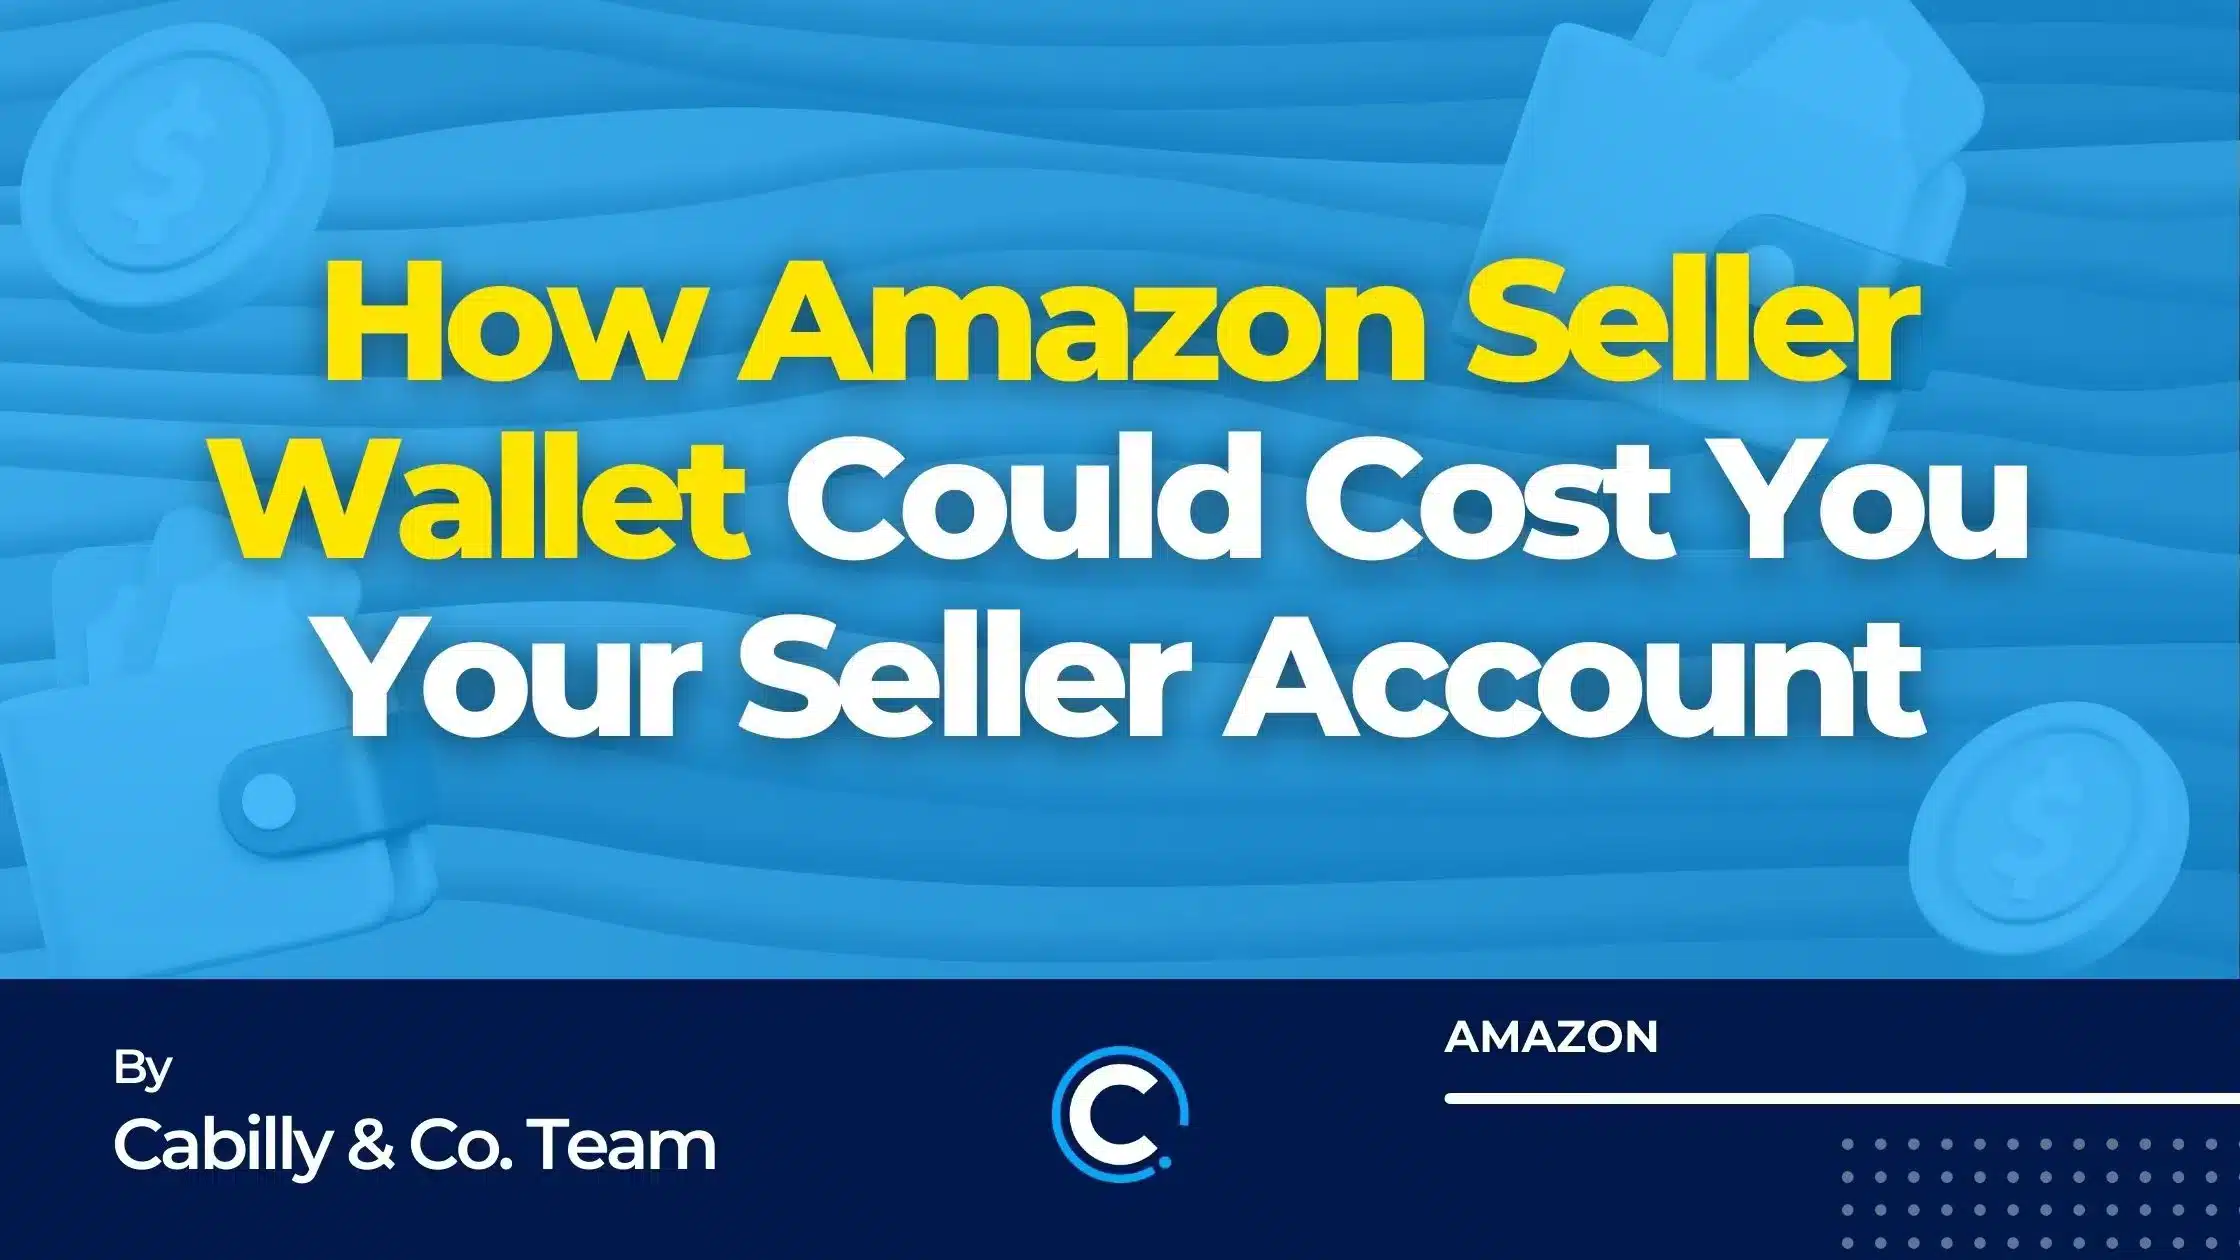 How-can-your-Amazon-seller-wallet-jeopardize-your-seller-account-CABILLY